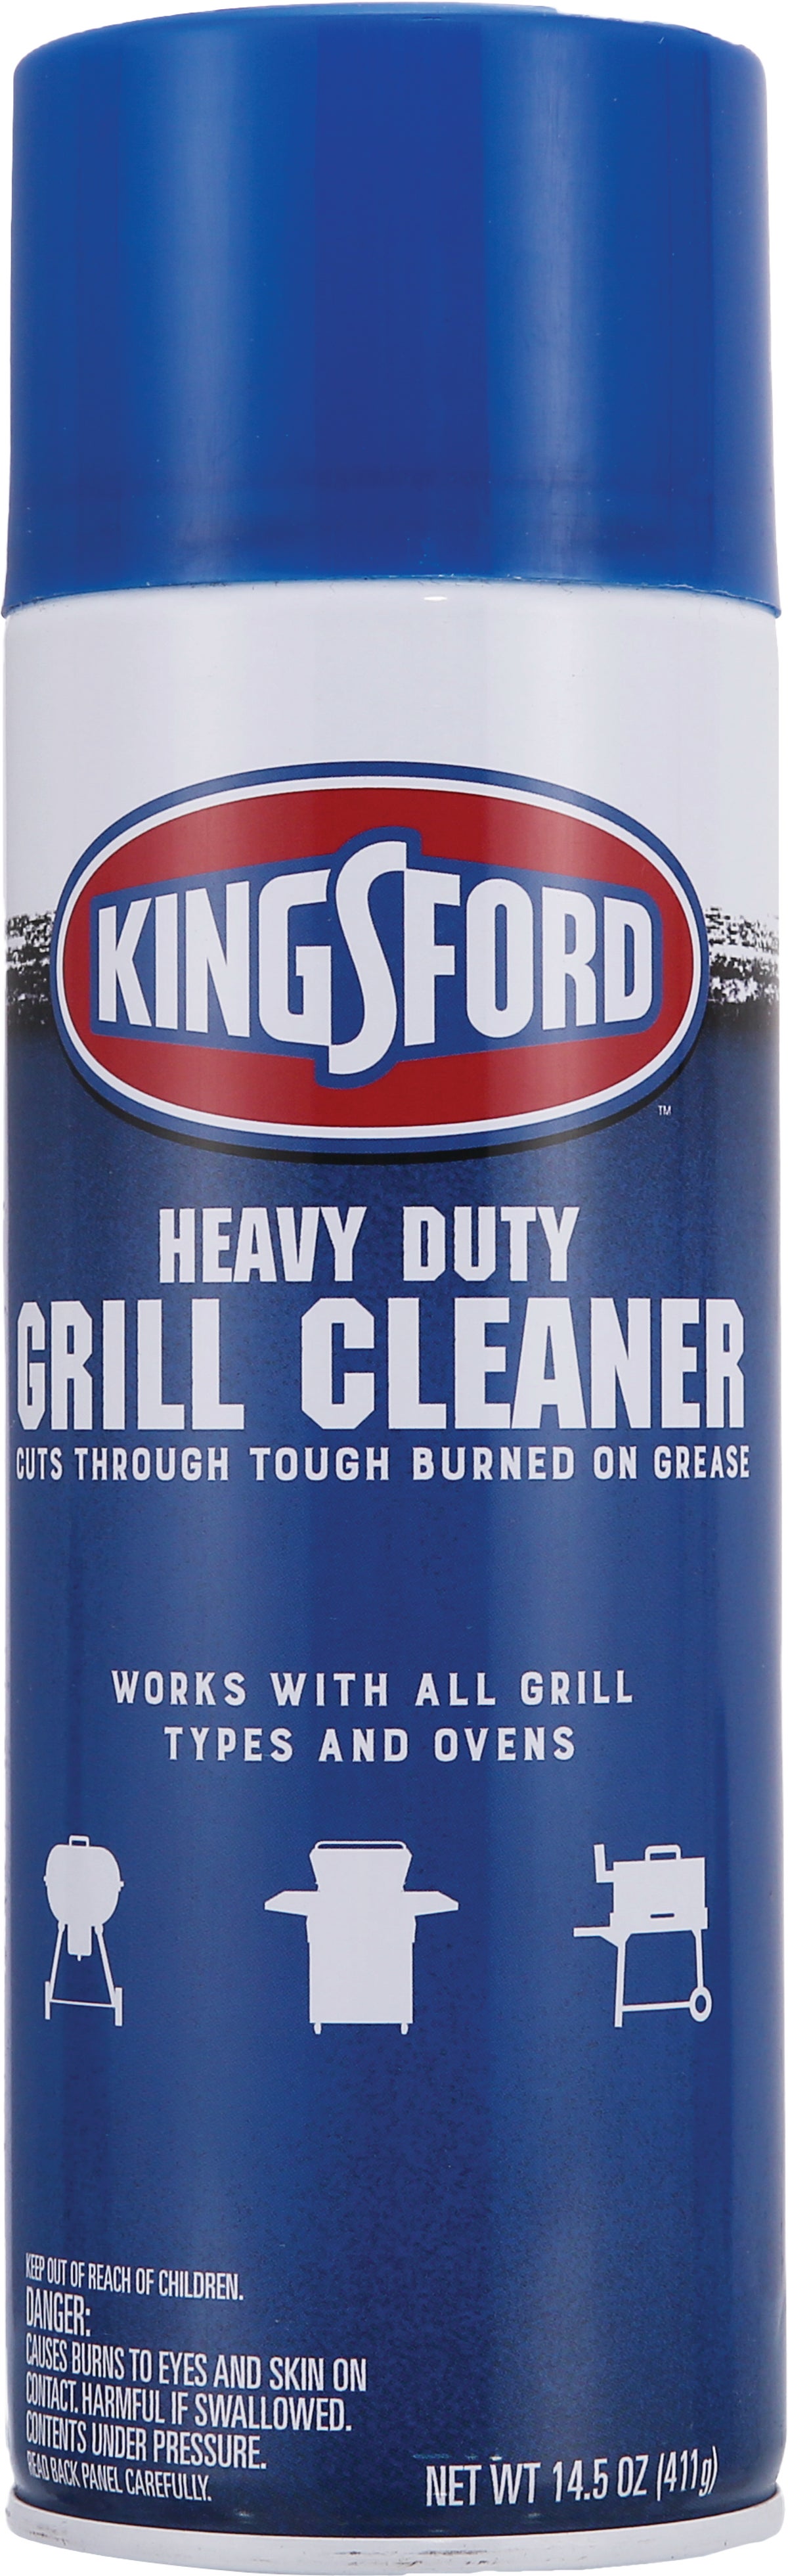  Brillo Basics Oven & Grill Heavy Duty Cleaner 12oz (Package May  Vary) Pack of (2) : Health & Household